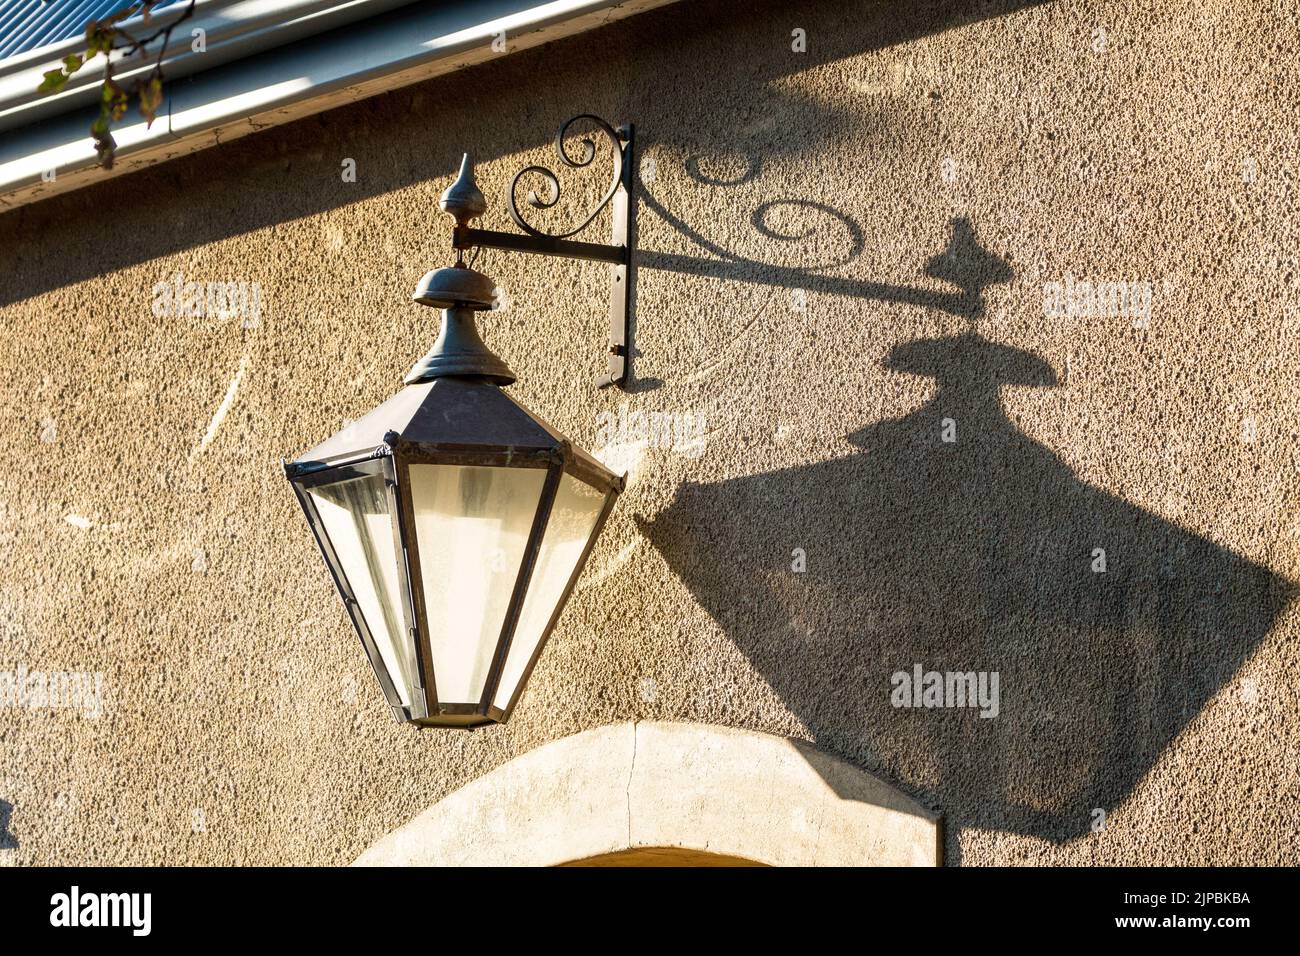 coach lamp close up on a wall surface with shadow showing architectural element and exterior decorative lighting Stock Photo